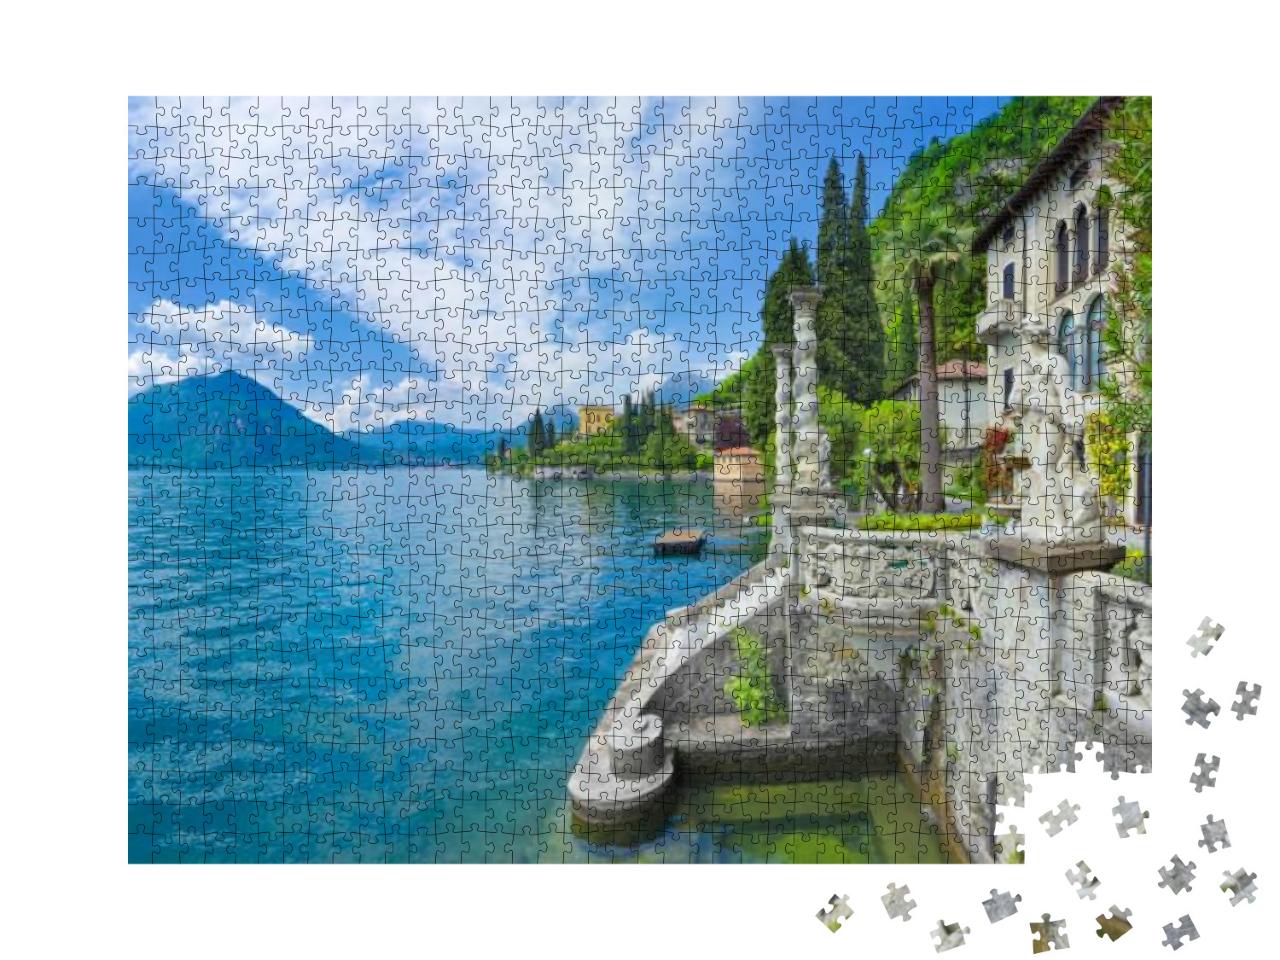 Puzzle 1000 Teile „Sonniges Panorama: Comer See mit Barockpark“